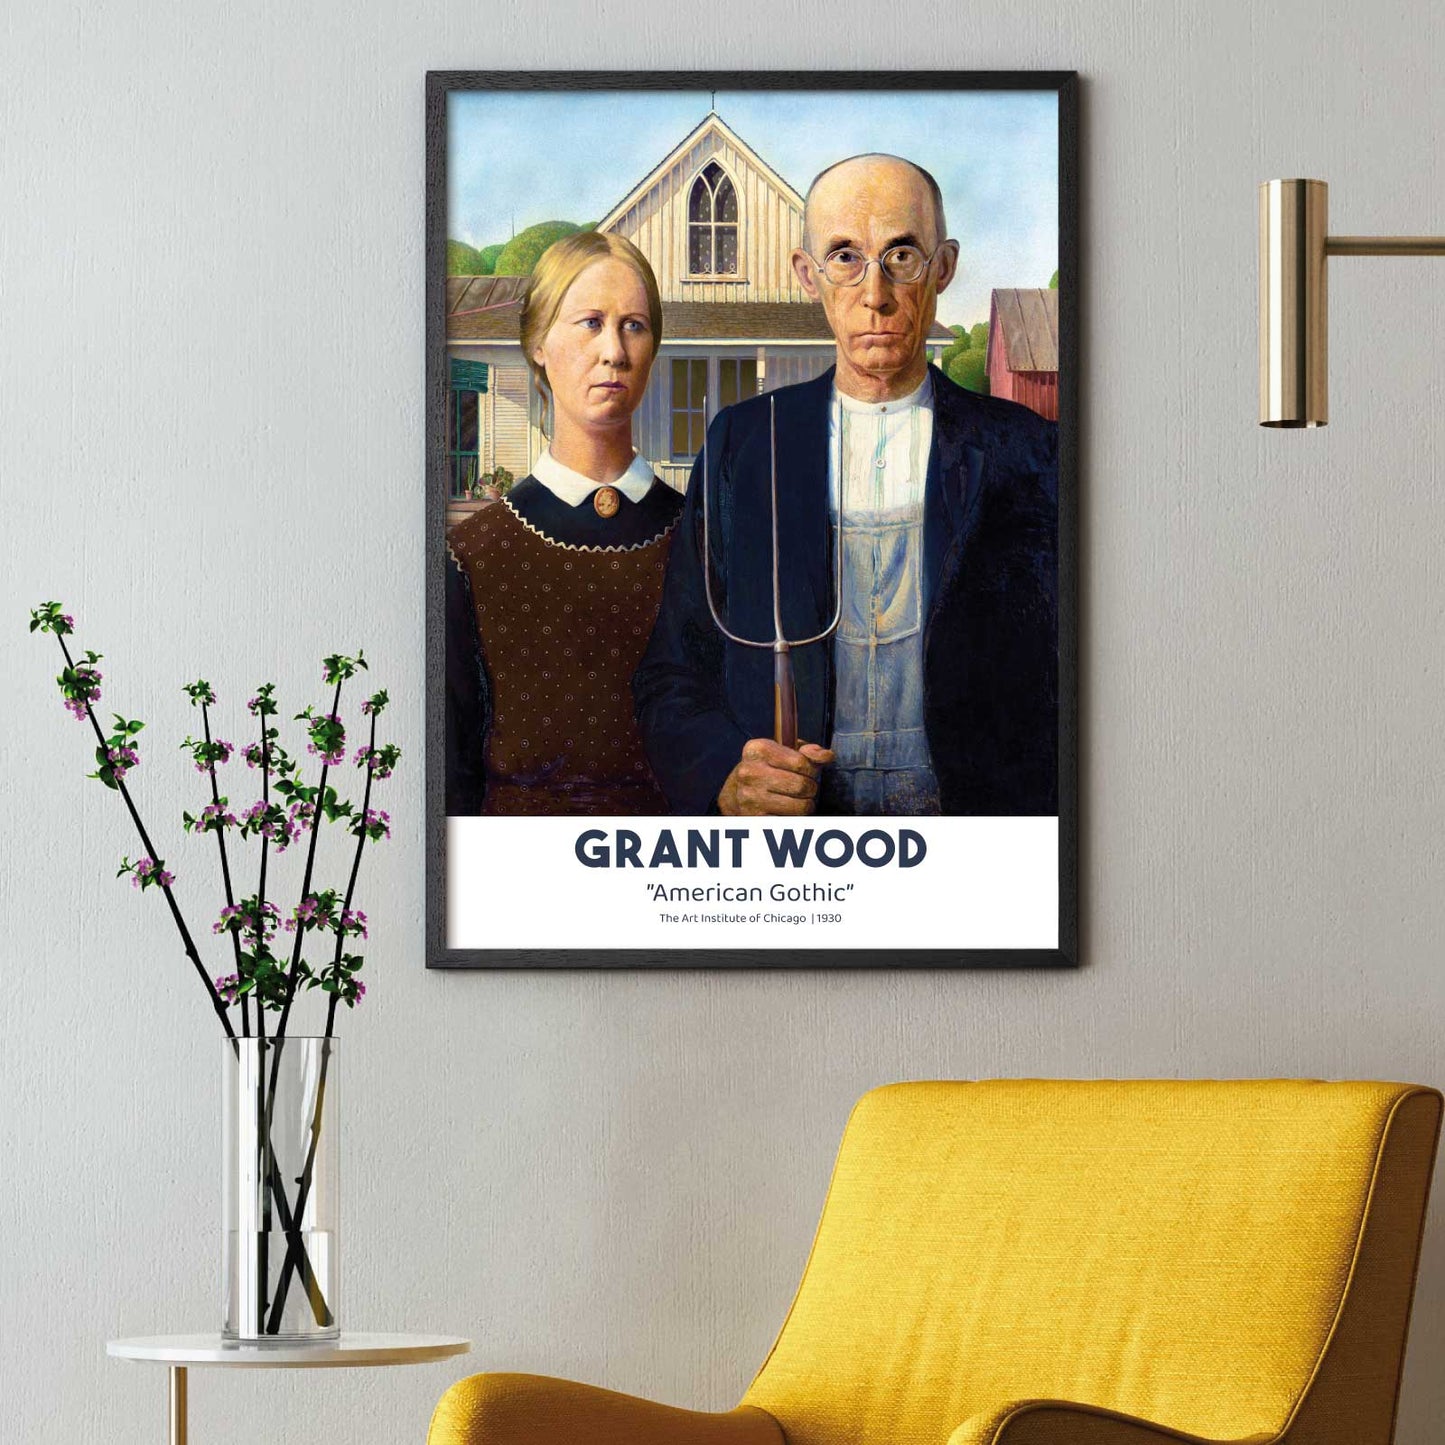 Art poster with Grant Wood "American Gothic"